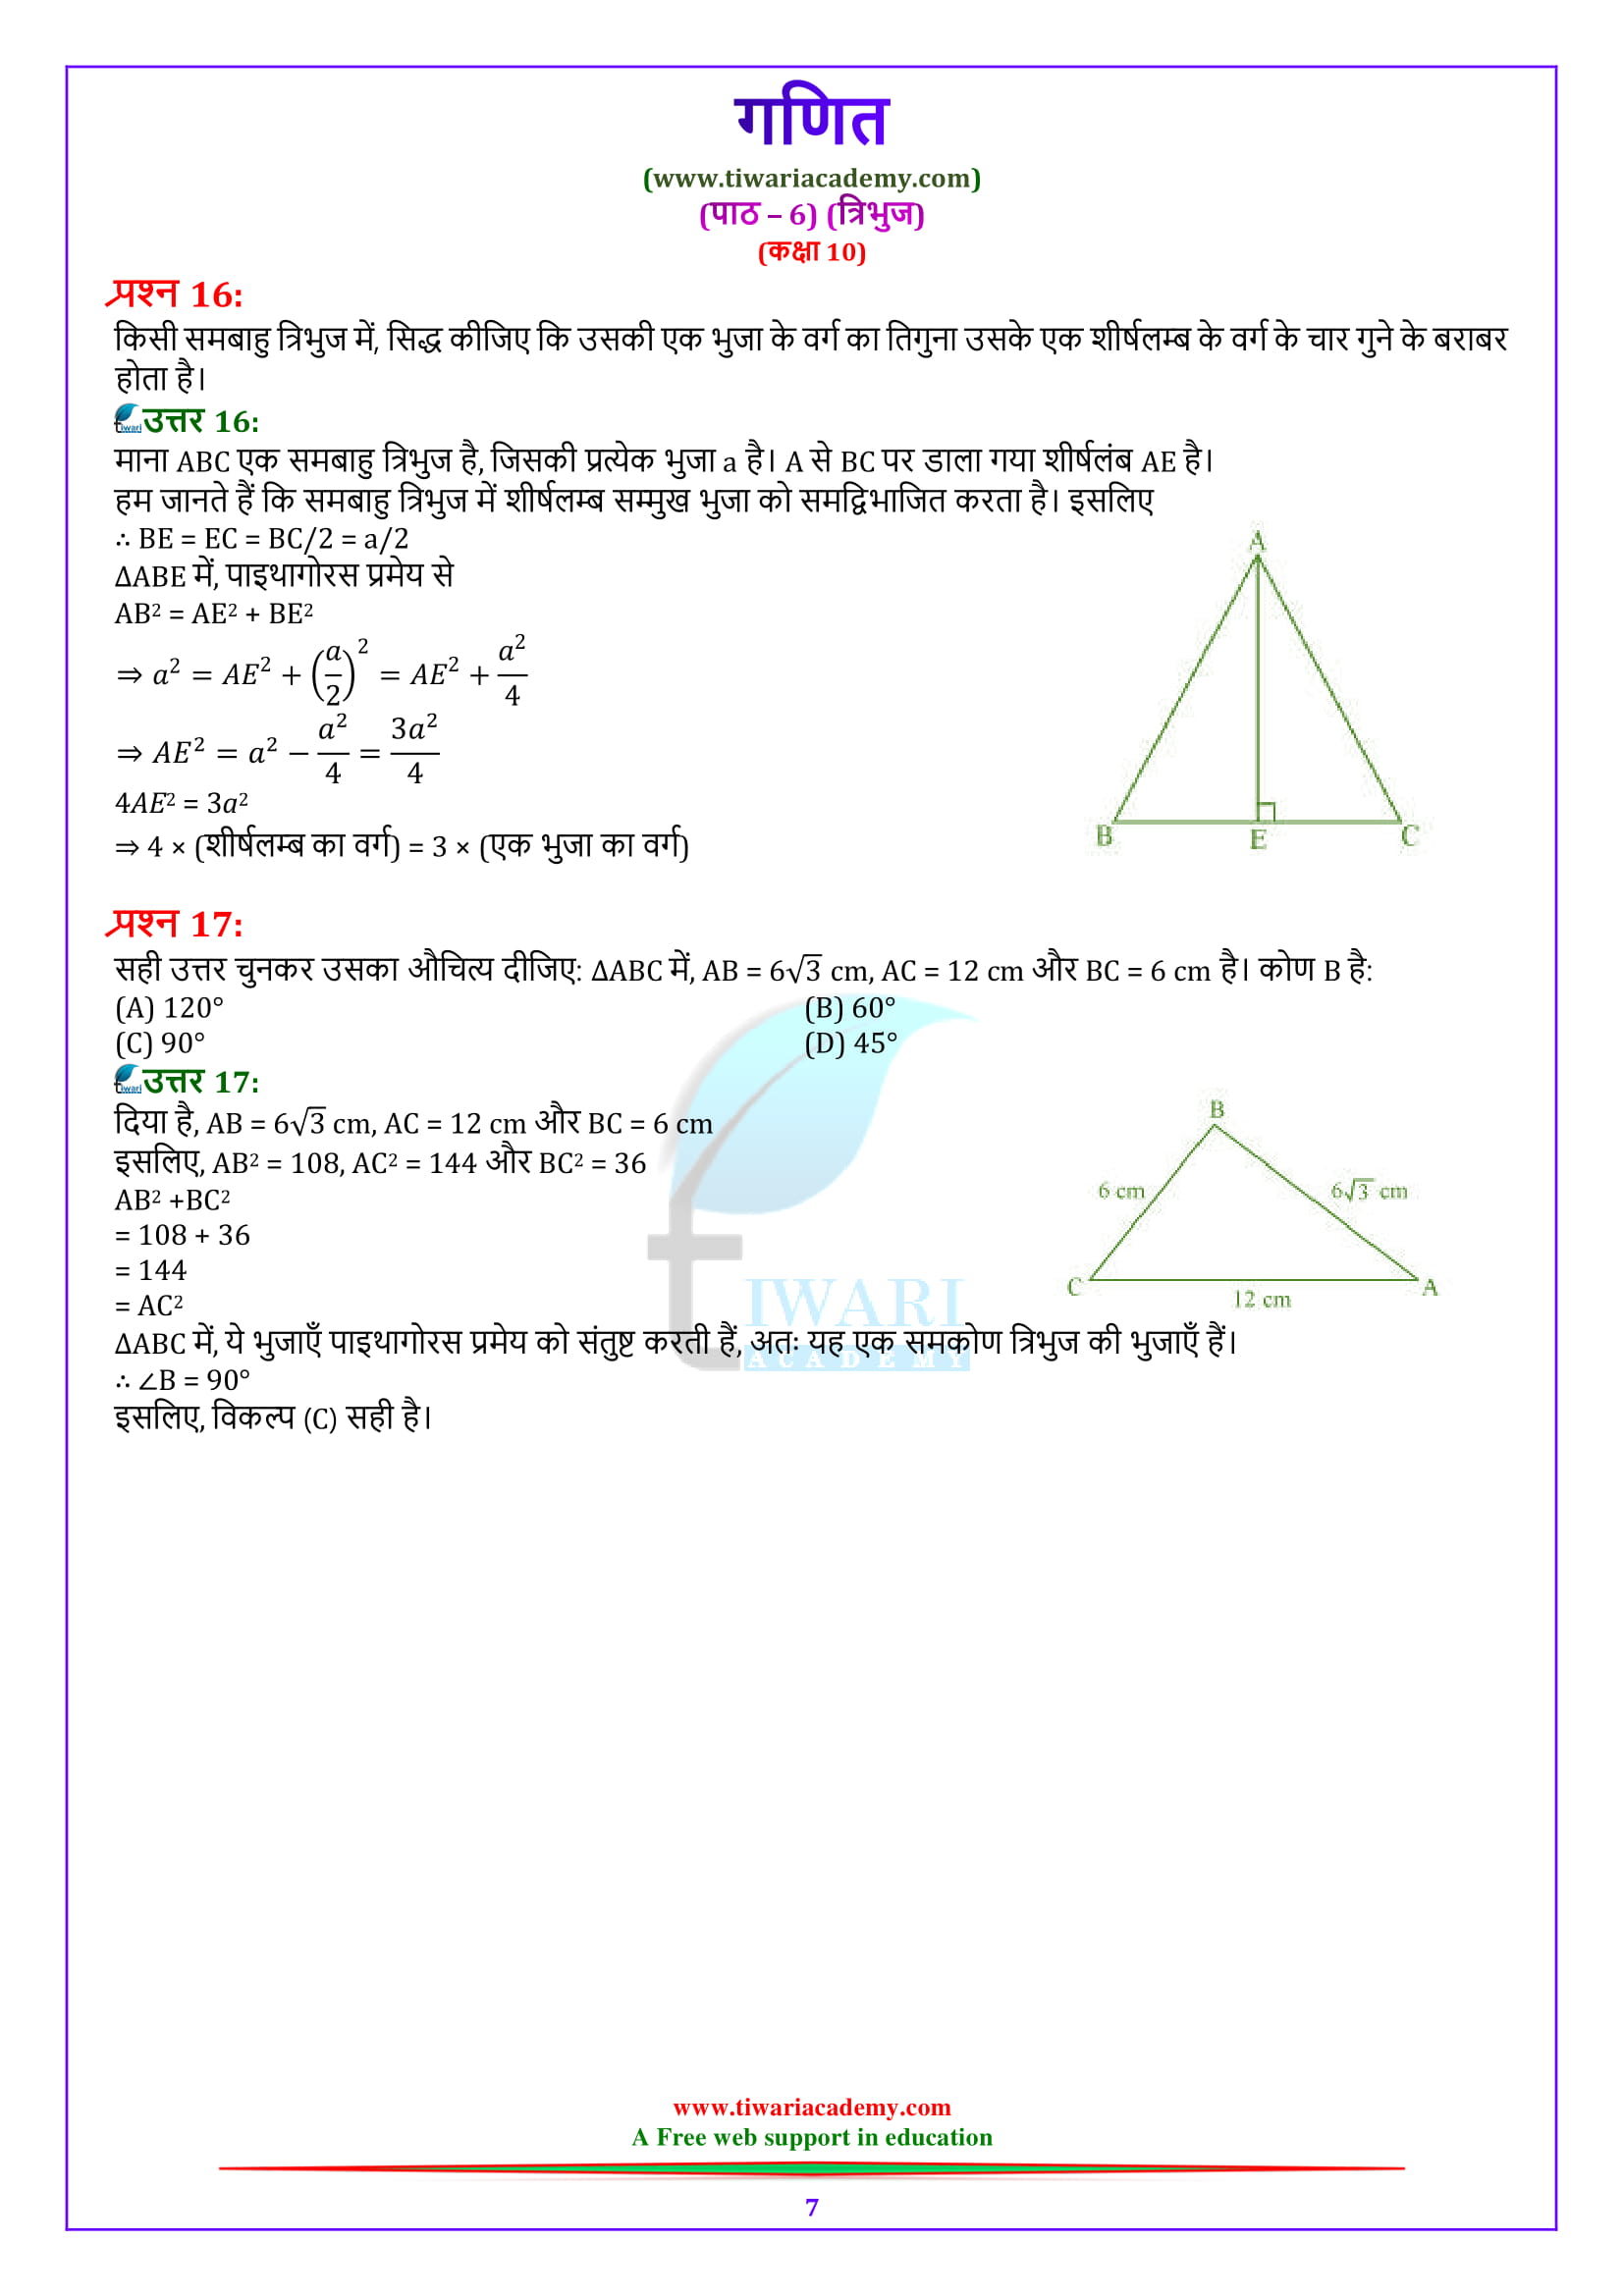 10 Maths Exercise 6.5 Solutions fully updated 2018-19